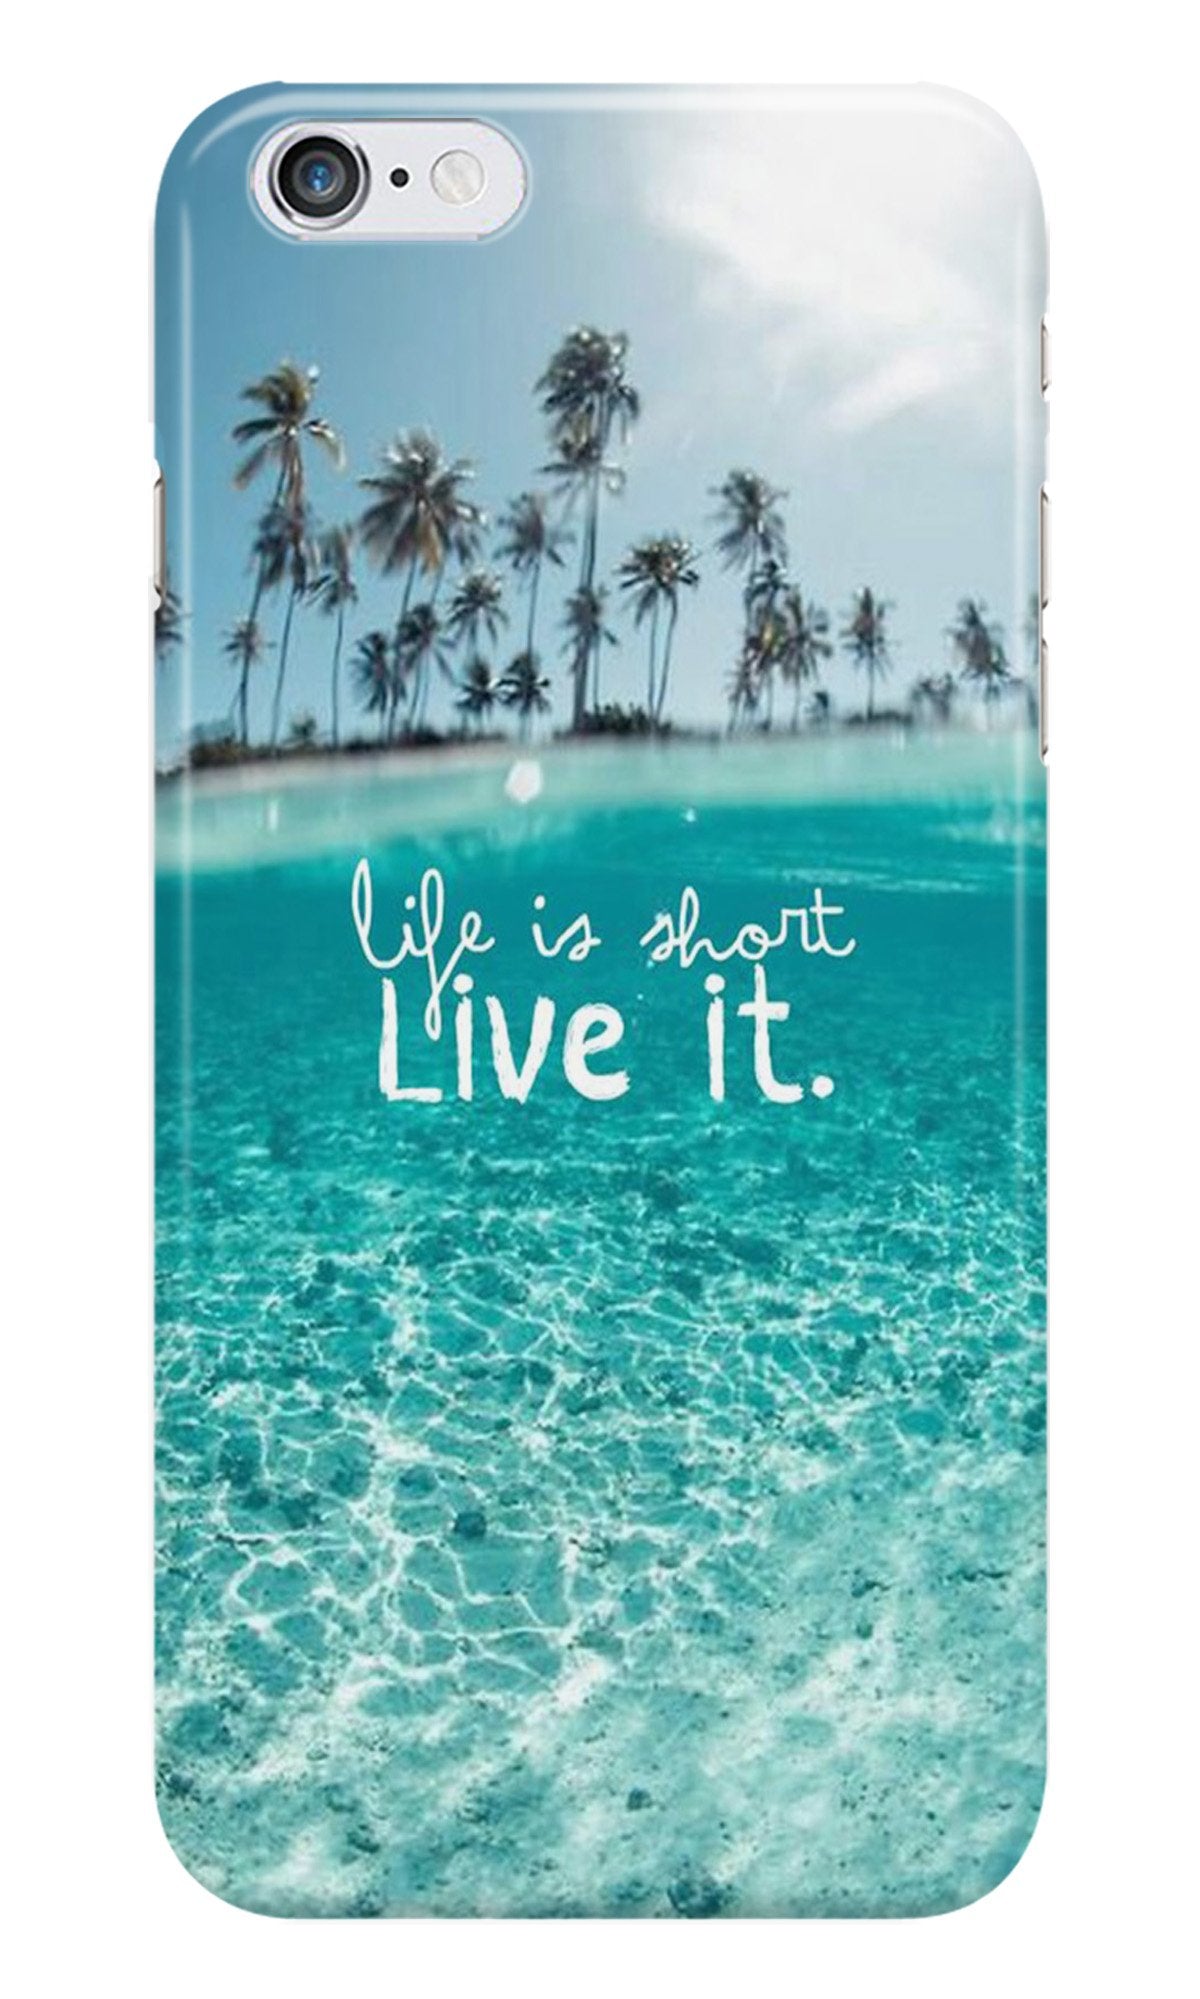 Life is short live it Case for iPhone 6/ 6s